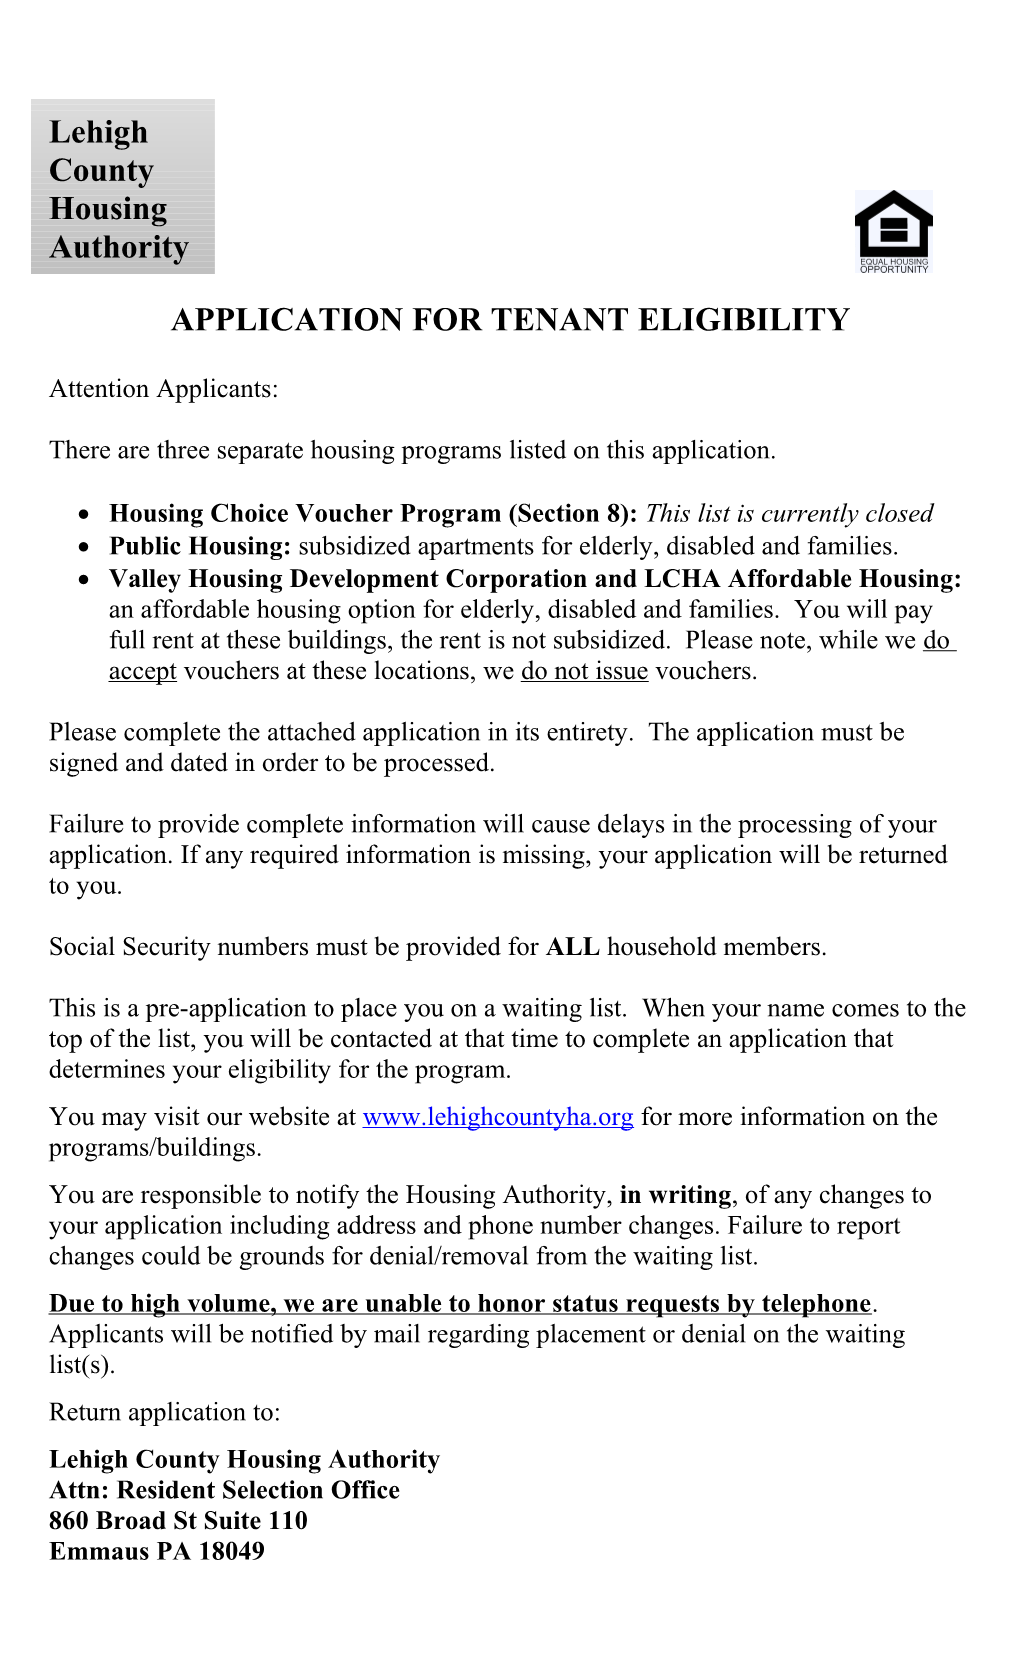 Application for Tenant Eligibility